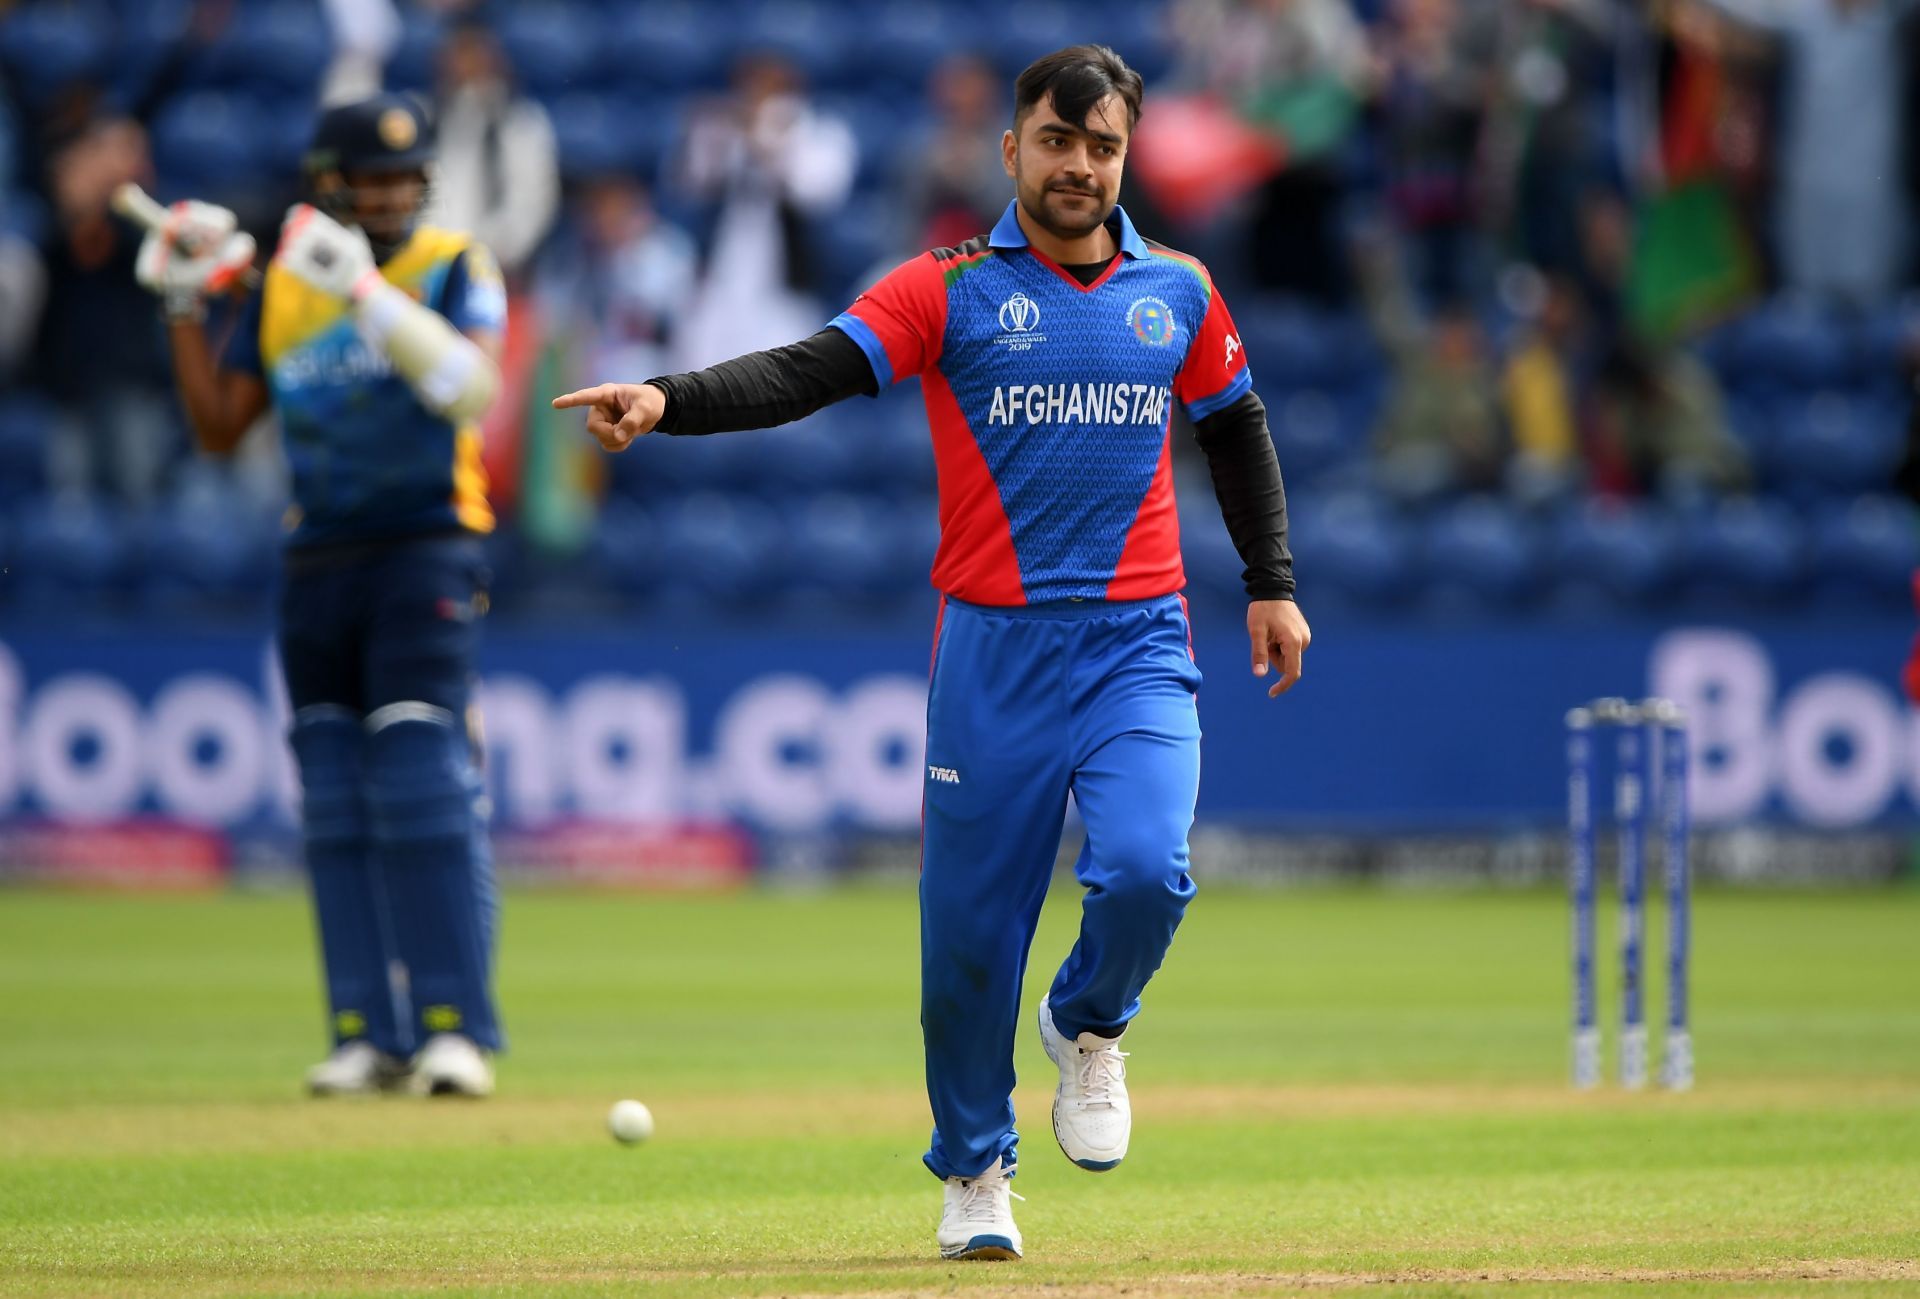 Can Rashid help Afghanistan qualify for the semi-finals of the T20 World Cup?